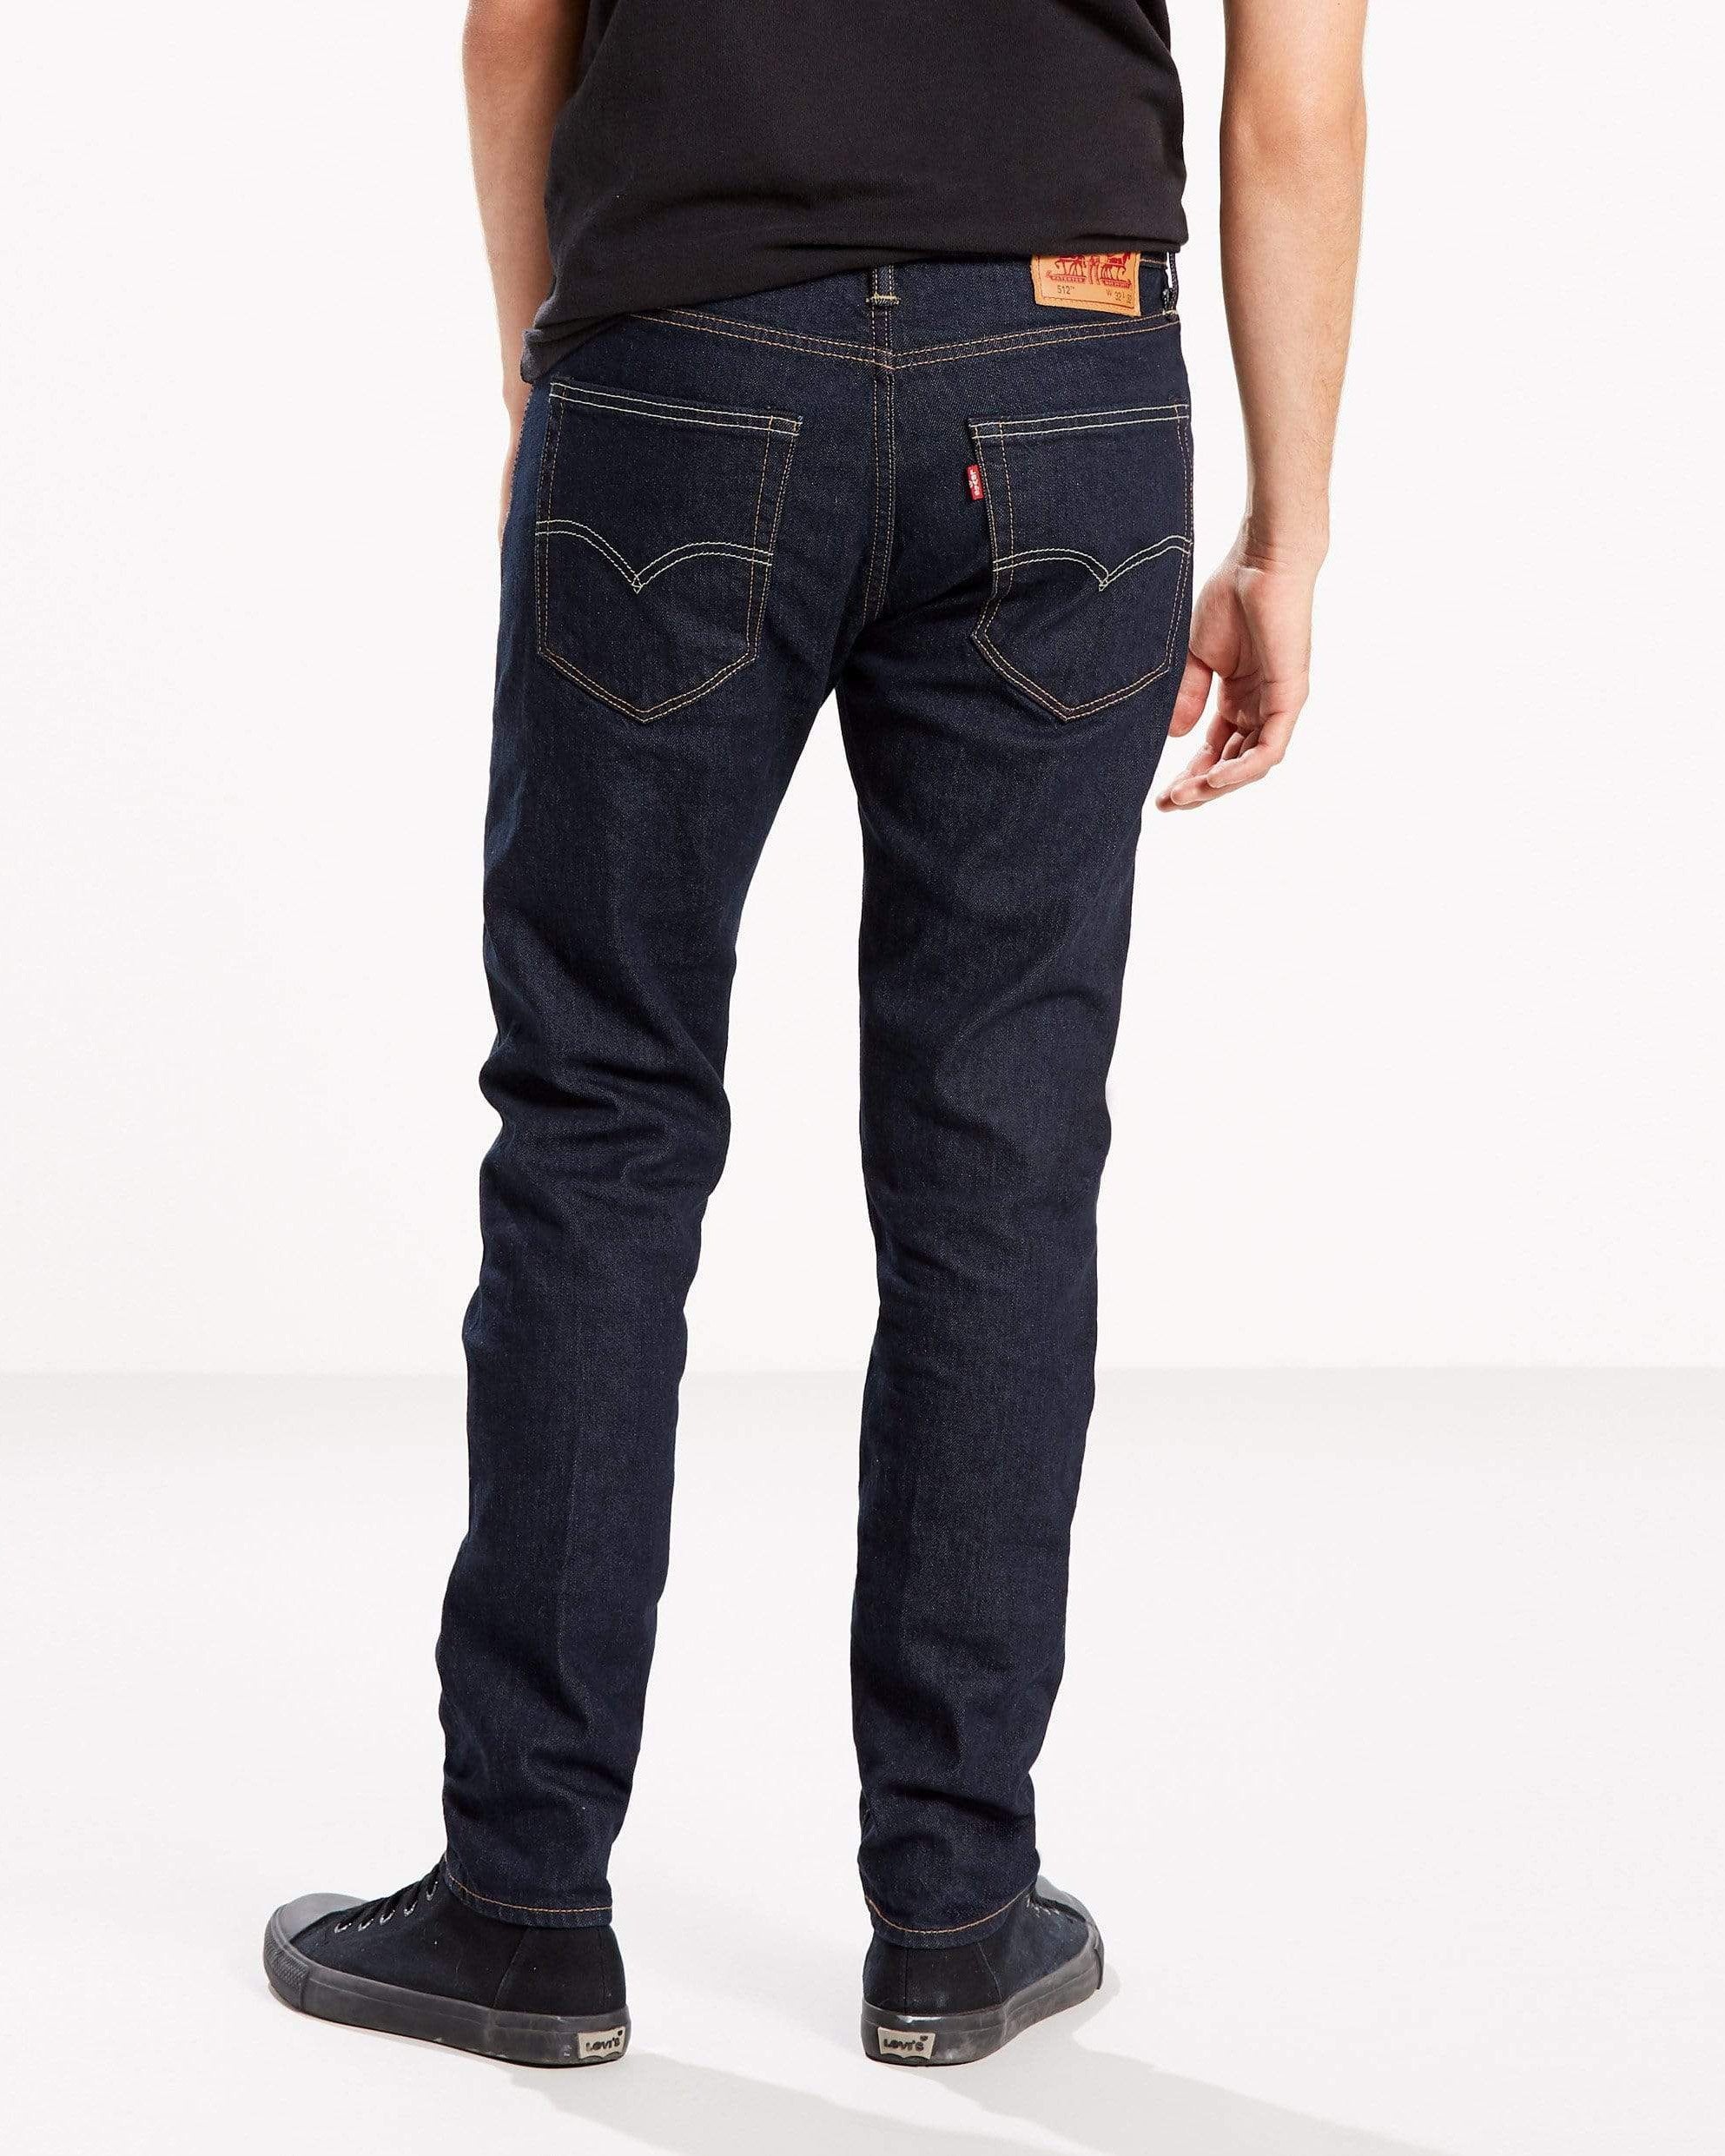 Levis 512 STRONG Slim Tapered Mens Jeans - Rock Cod - and Street Fashion from Jeanstore